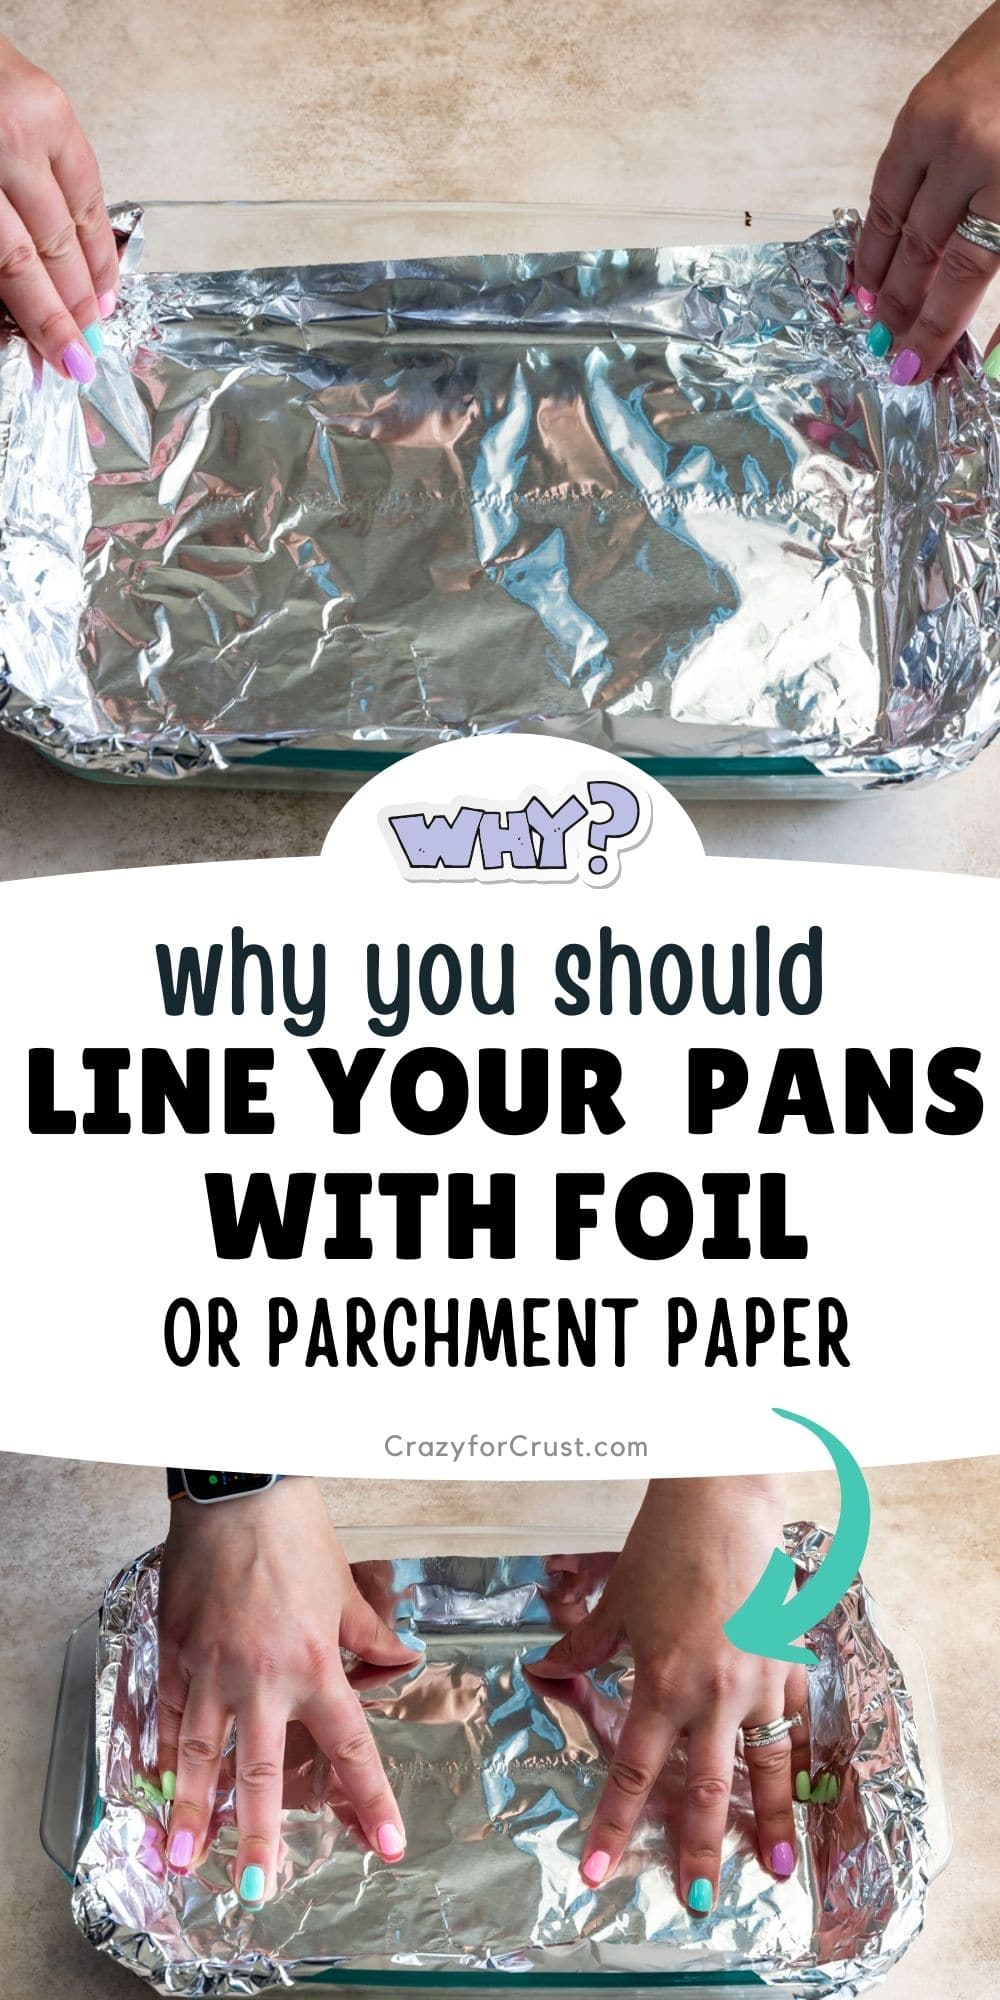 What Happens If You Use Wax Paper Instead Of Parchment Paper?